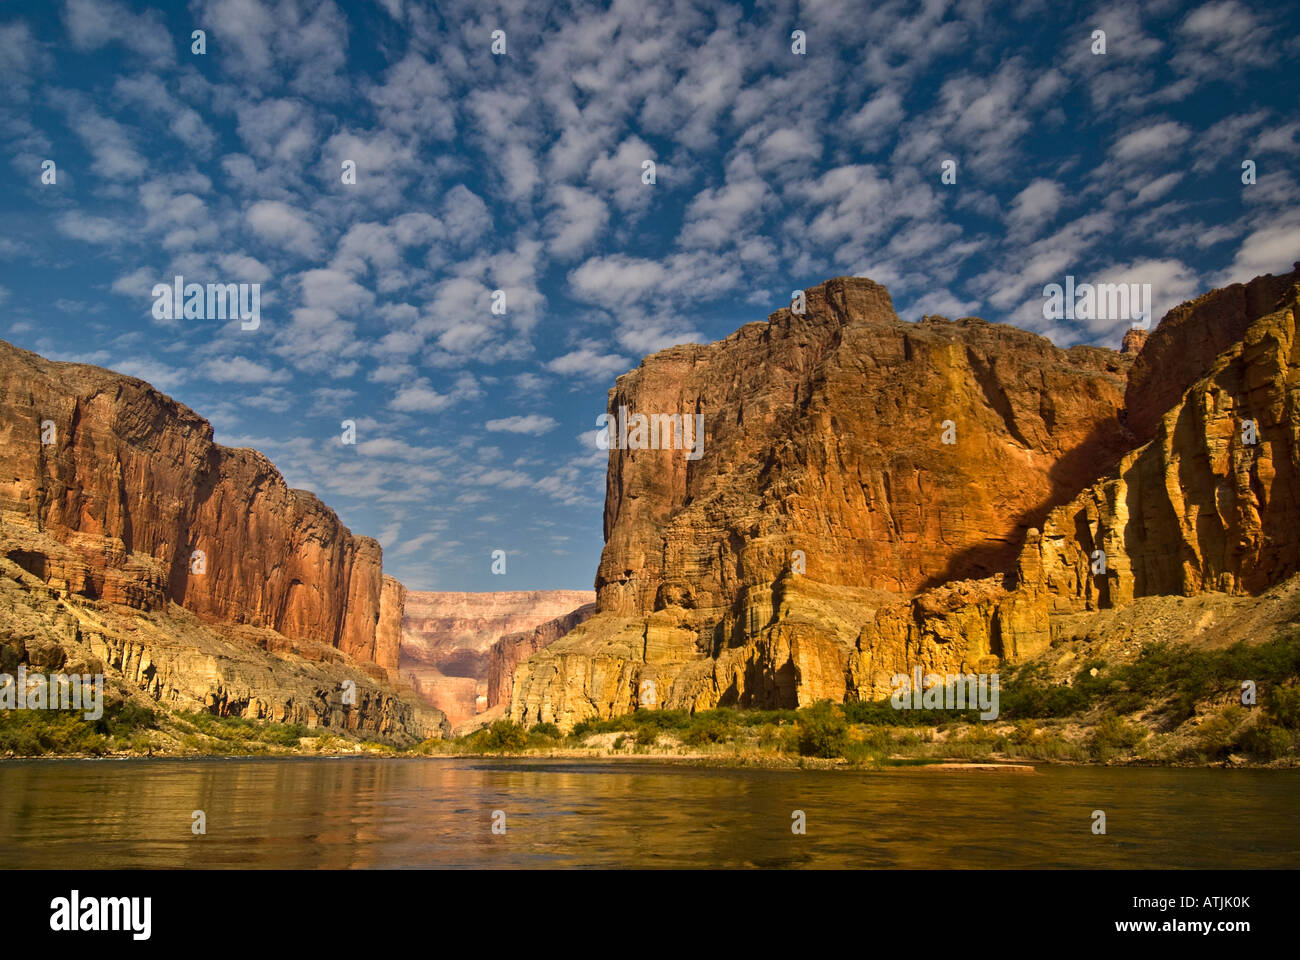 Scenery along the river while rafting the Colorado River in the Grand Canyon National Park Arizona Stock Photo